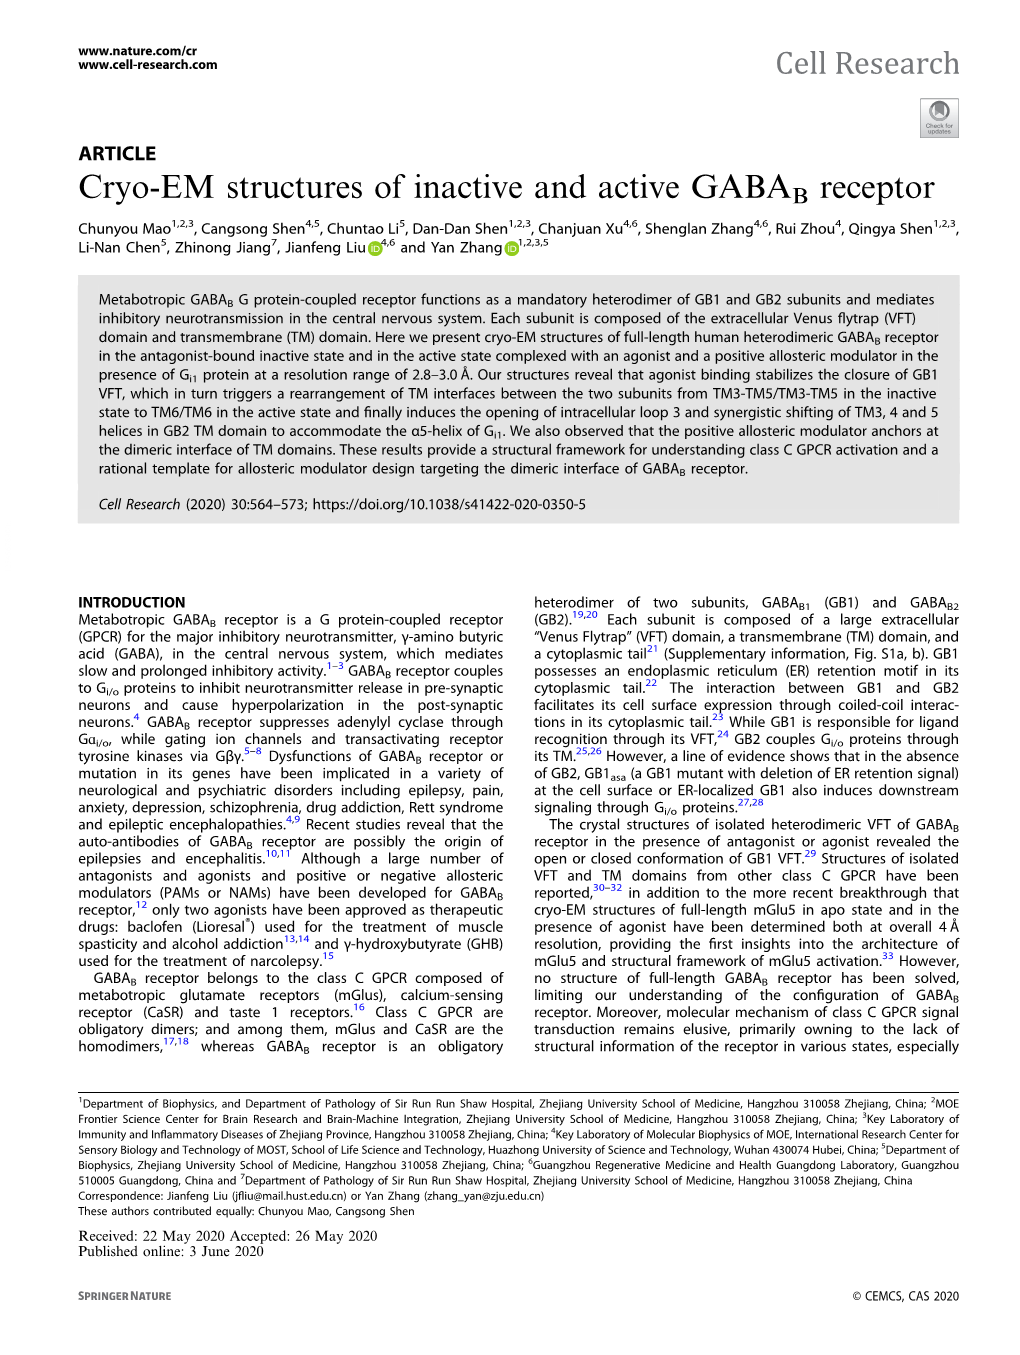 Cryo-EM Structures of Inactive and Active GABAB Receptor